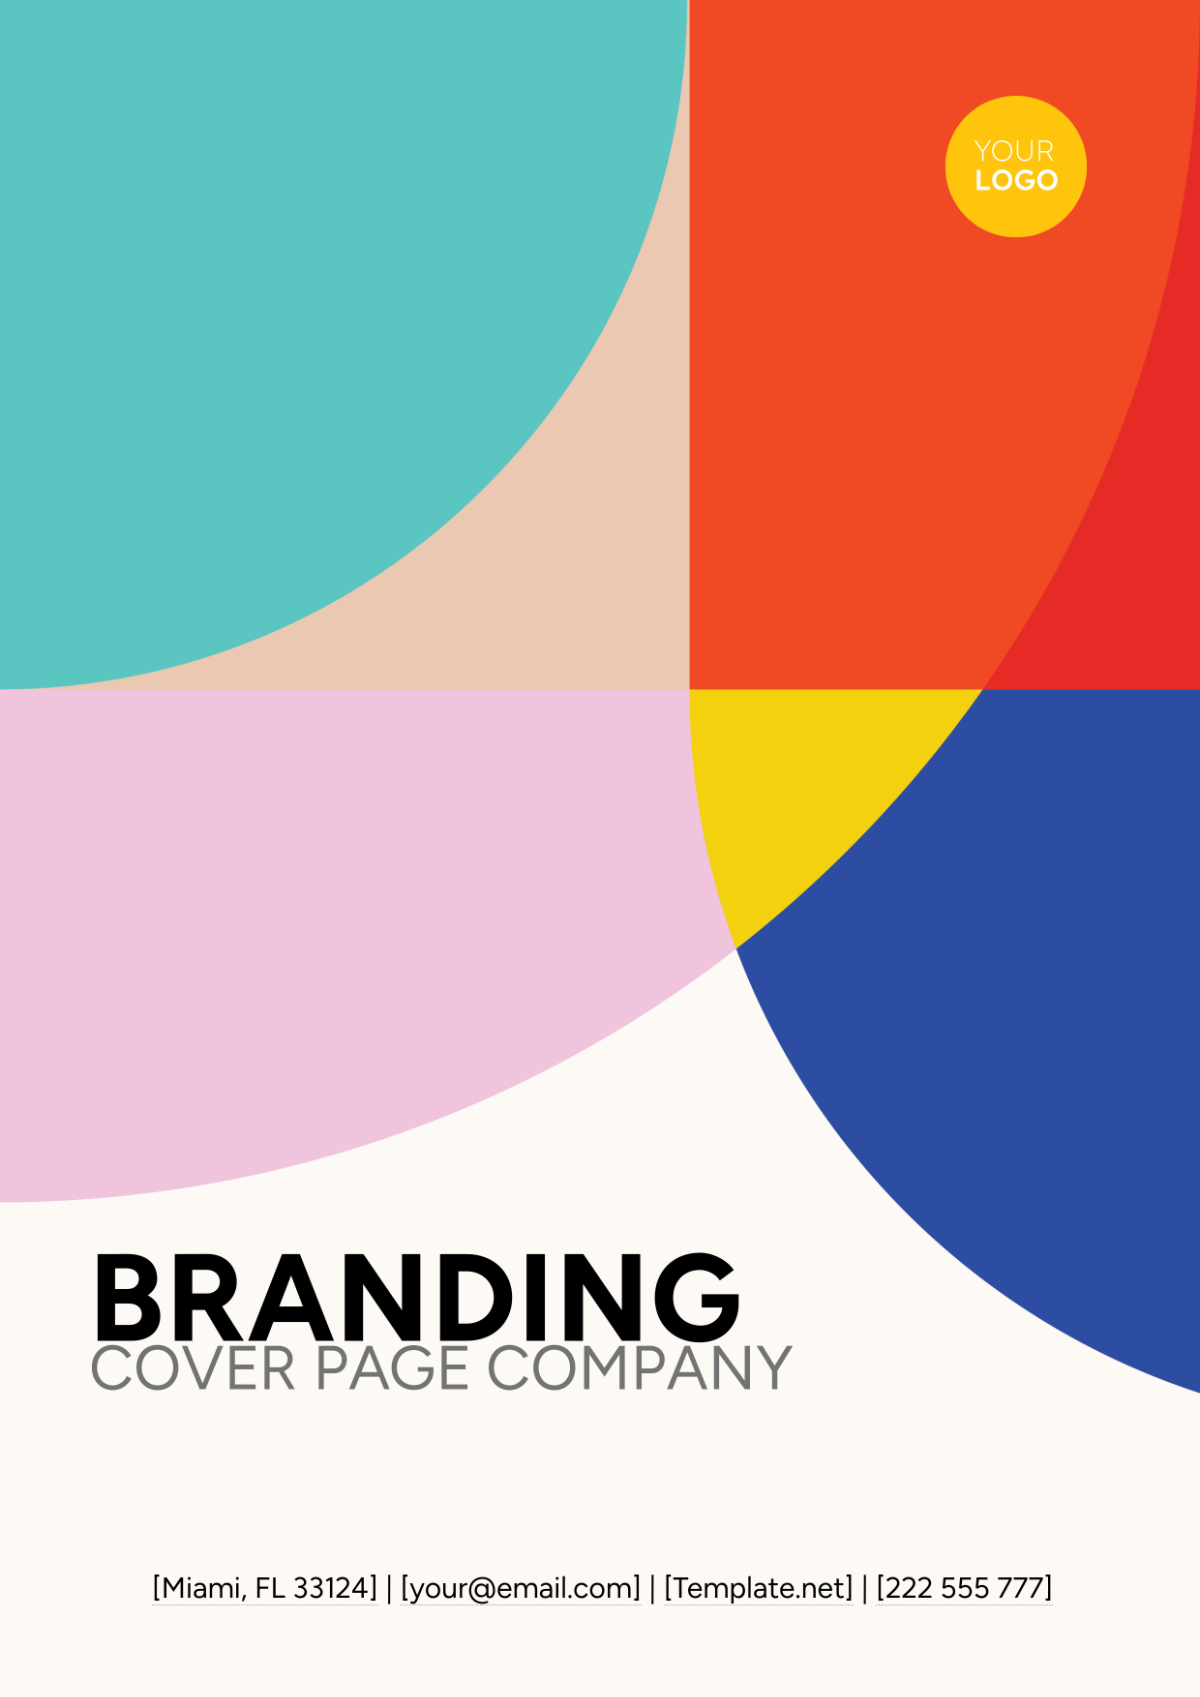 Branding Cover Page Company